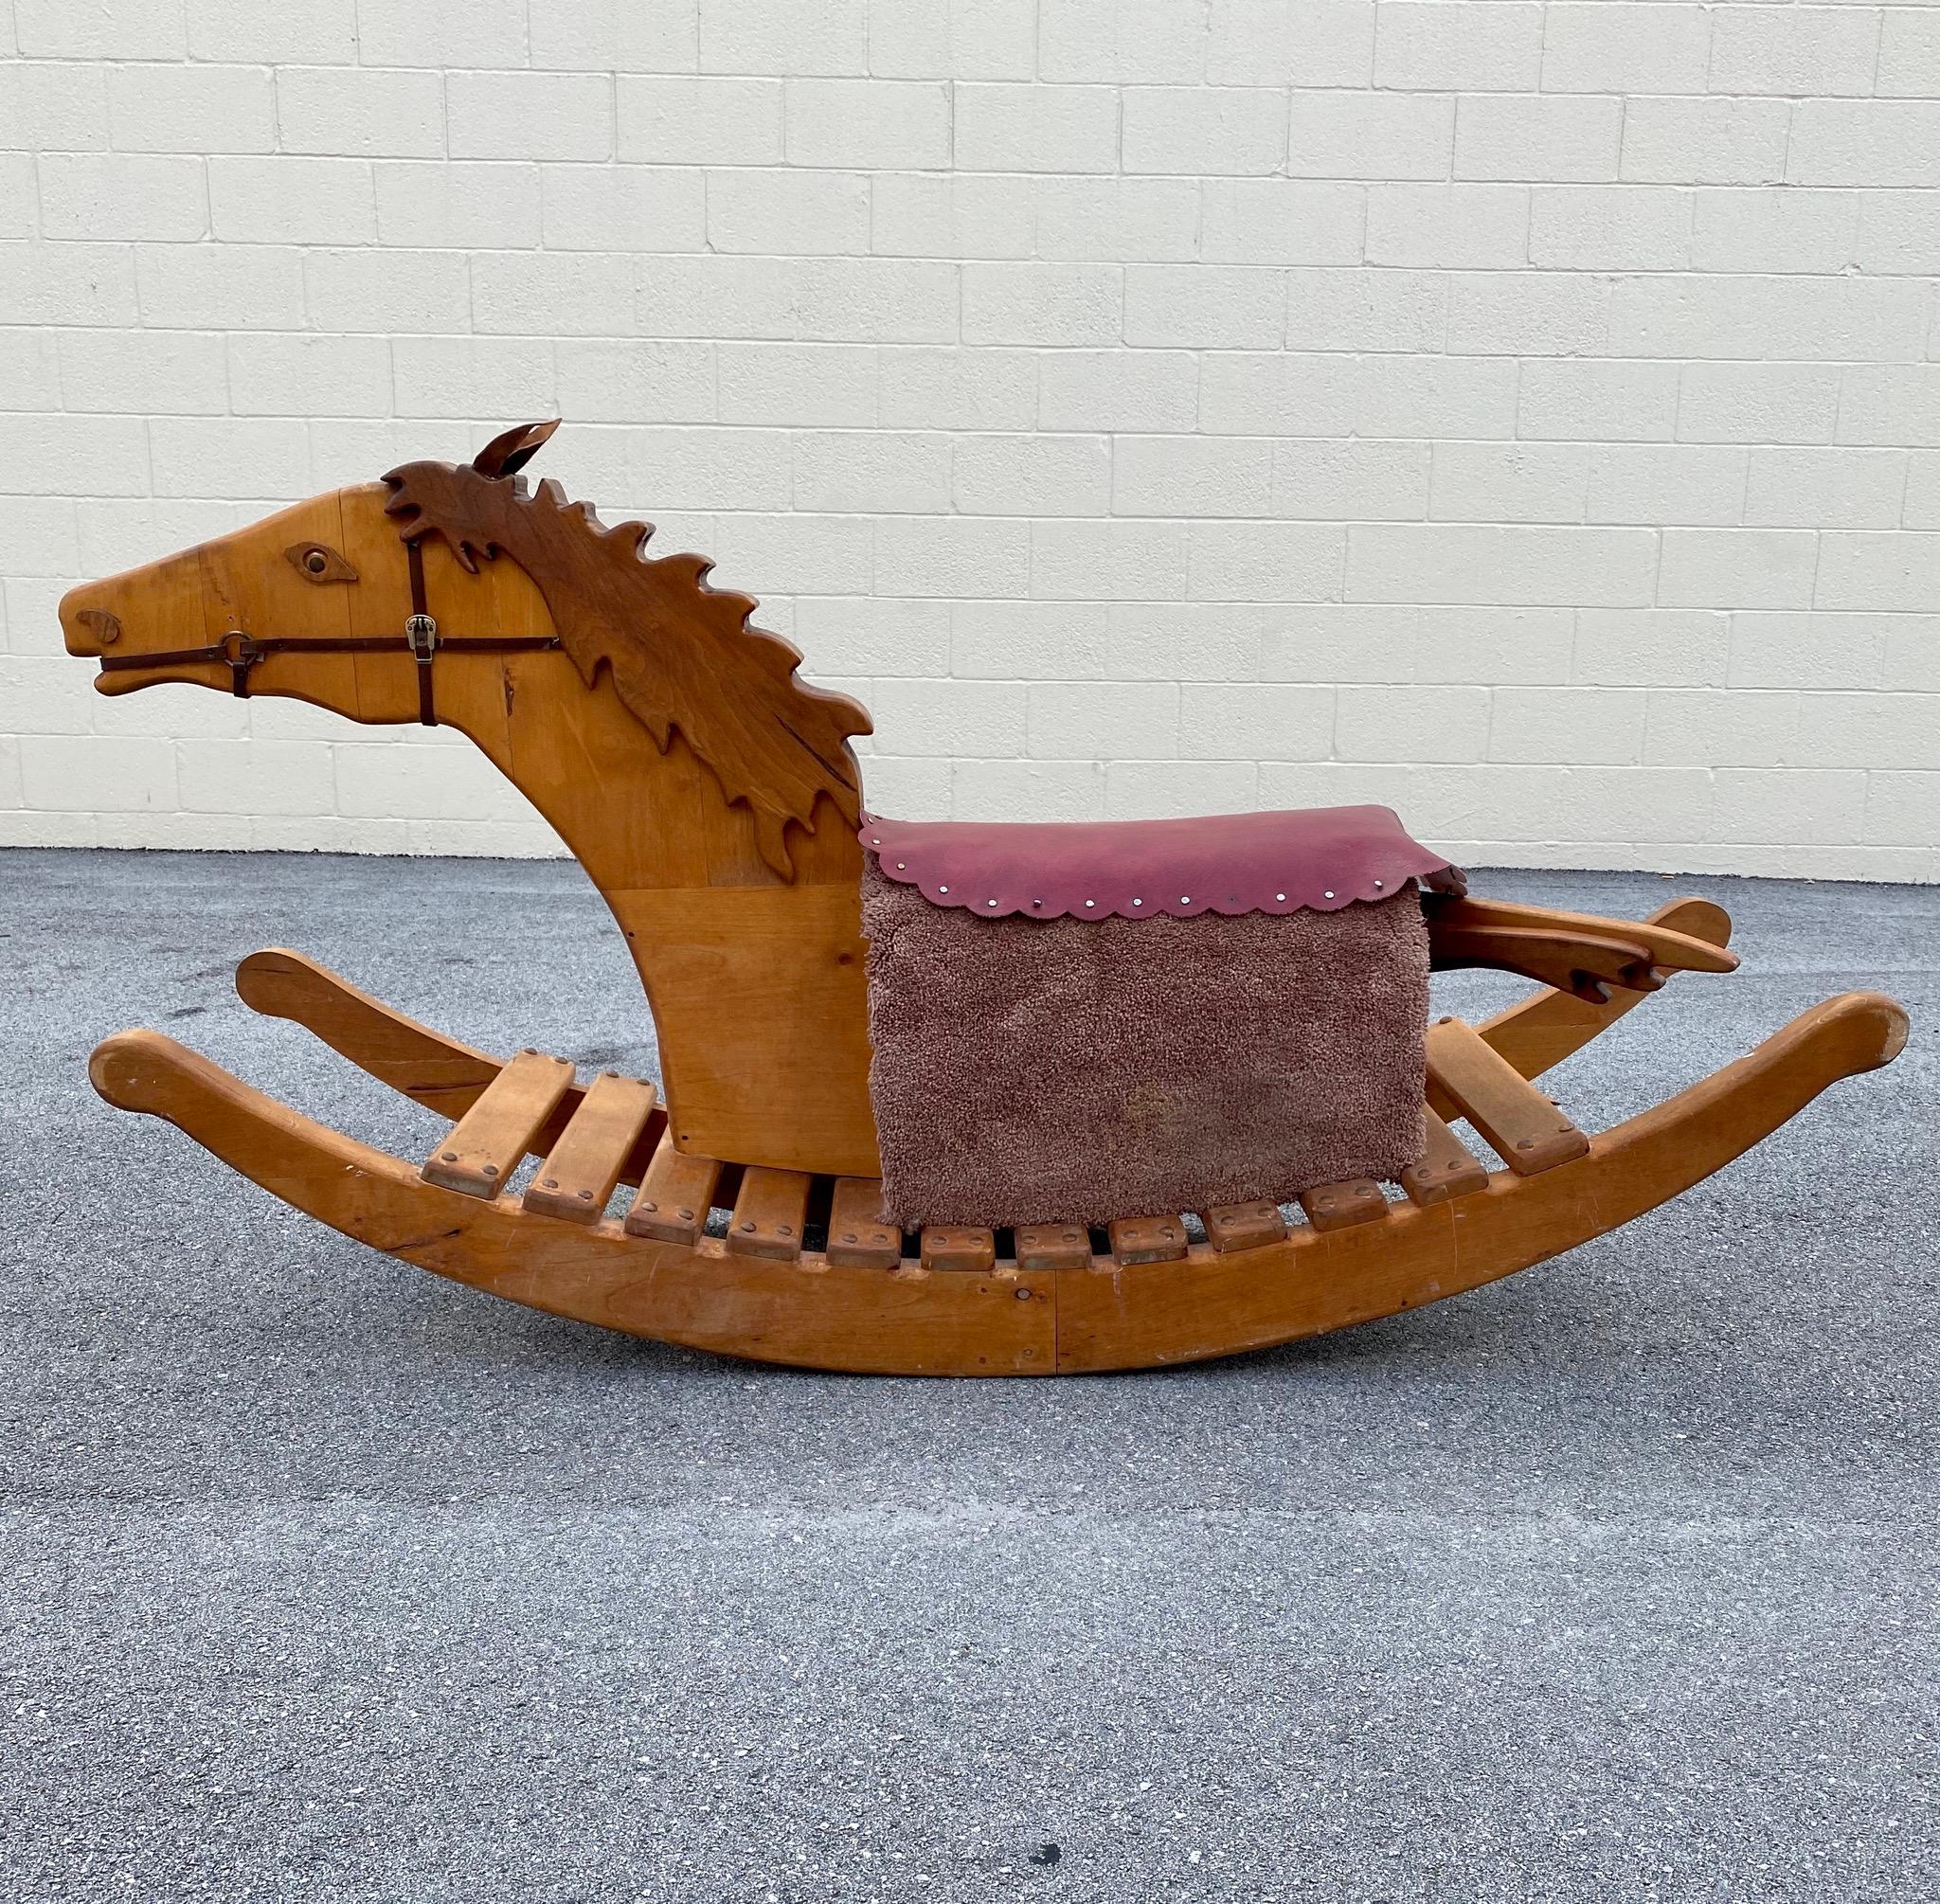 On offer on this occasion is one of the most stunning, full rocking horse chair you could hope to find. This is an ultra-rare opportunity to acquire what is, unequivocally, the best of the best, it being a most spectacular and beautifully-presented